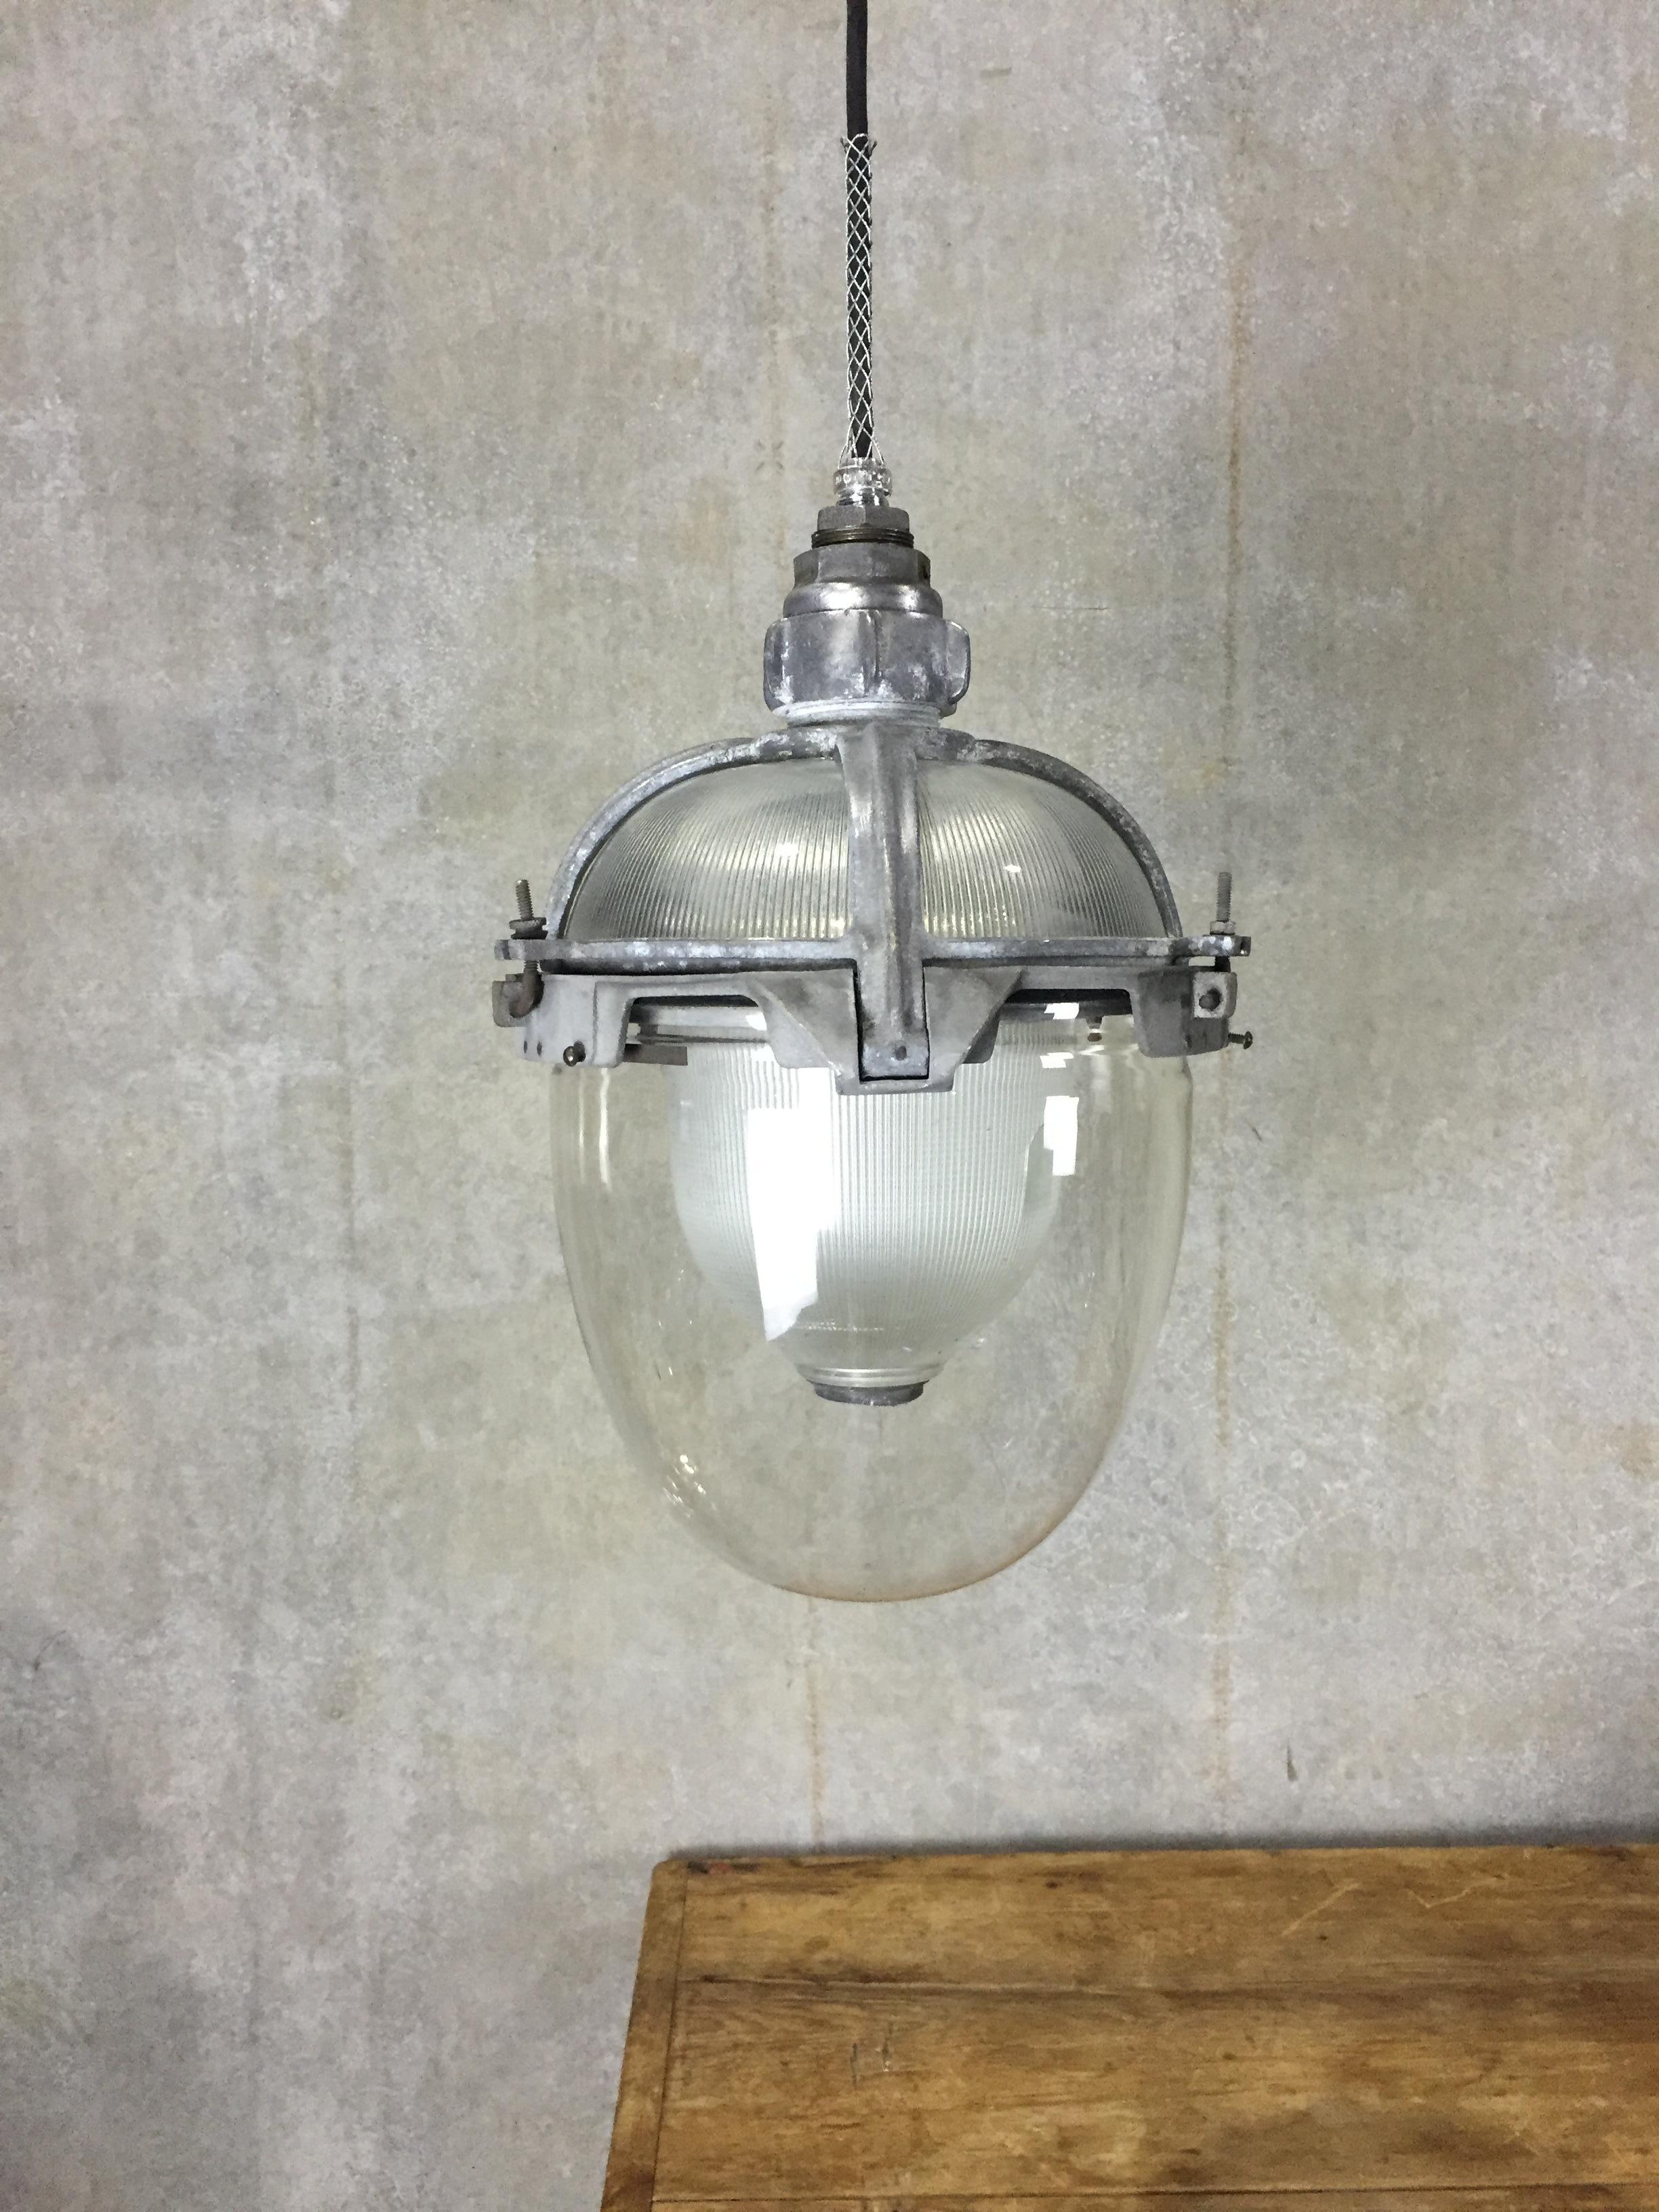 Incredible set of Holophane pendants, rewired, holds a regular incandescent or led bulb with full CSA approval.
Most of these types are found in HYDRO sub stations and rarely come to market. a rare opportunity to get a group of lights like this .
WE